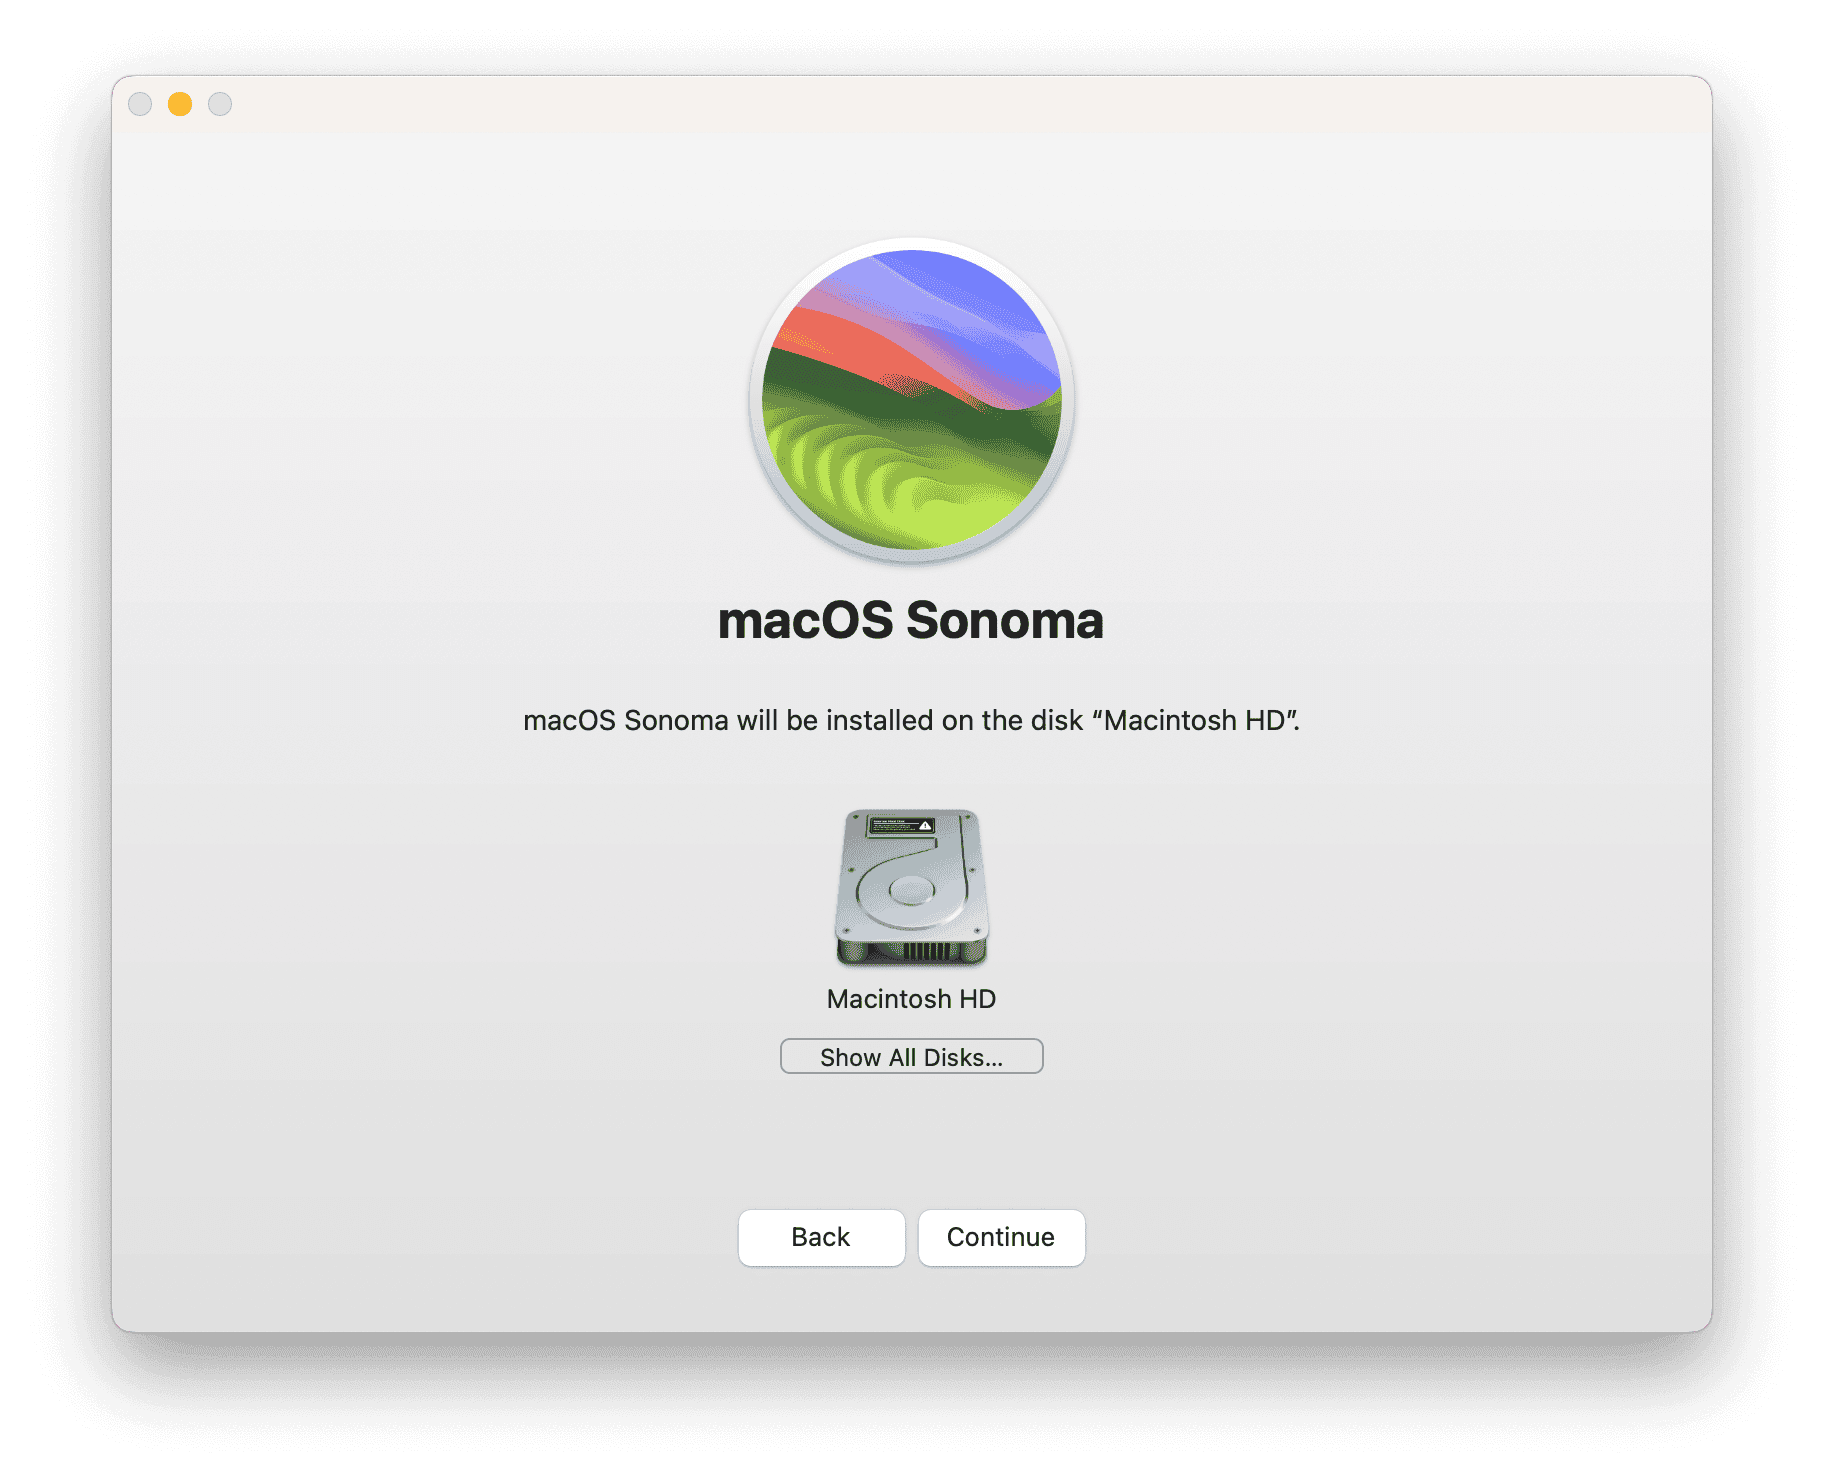 Install macOS Sonoma on a Partion